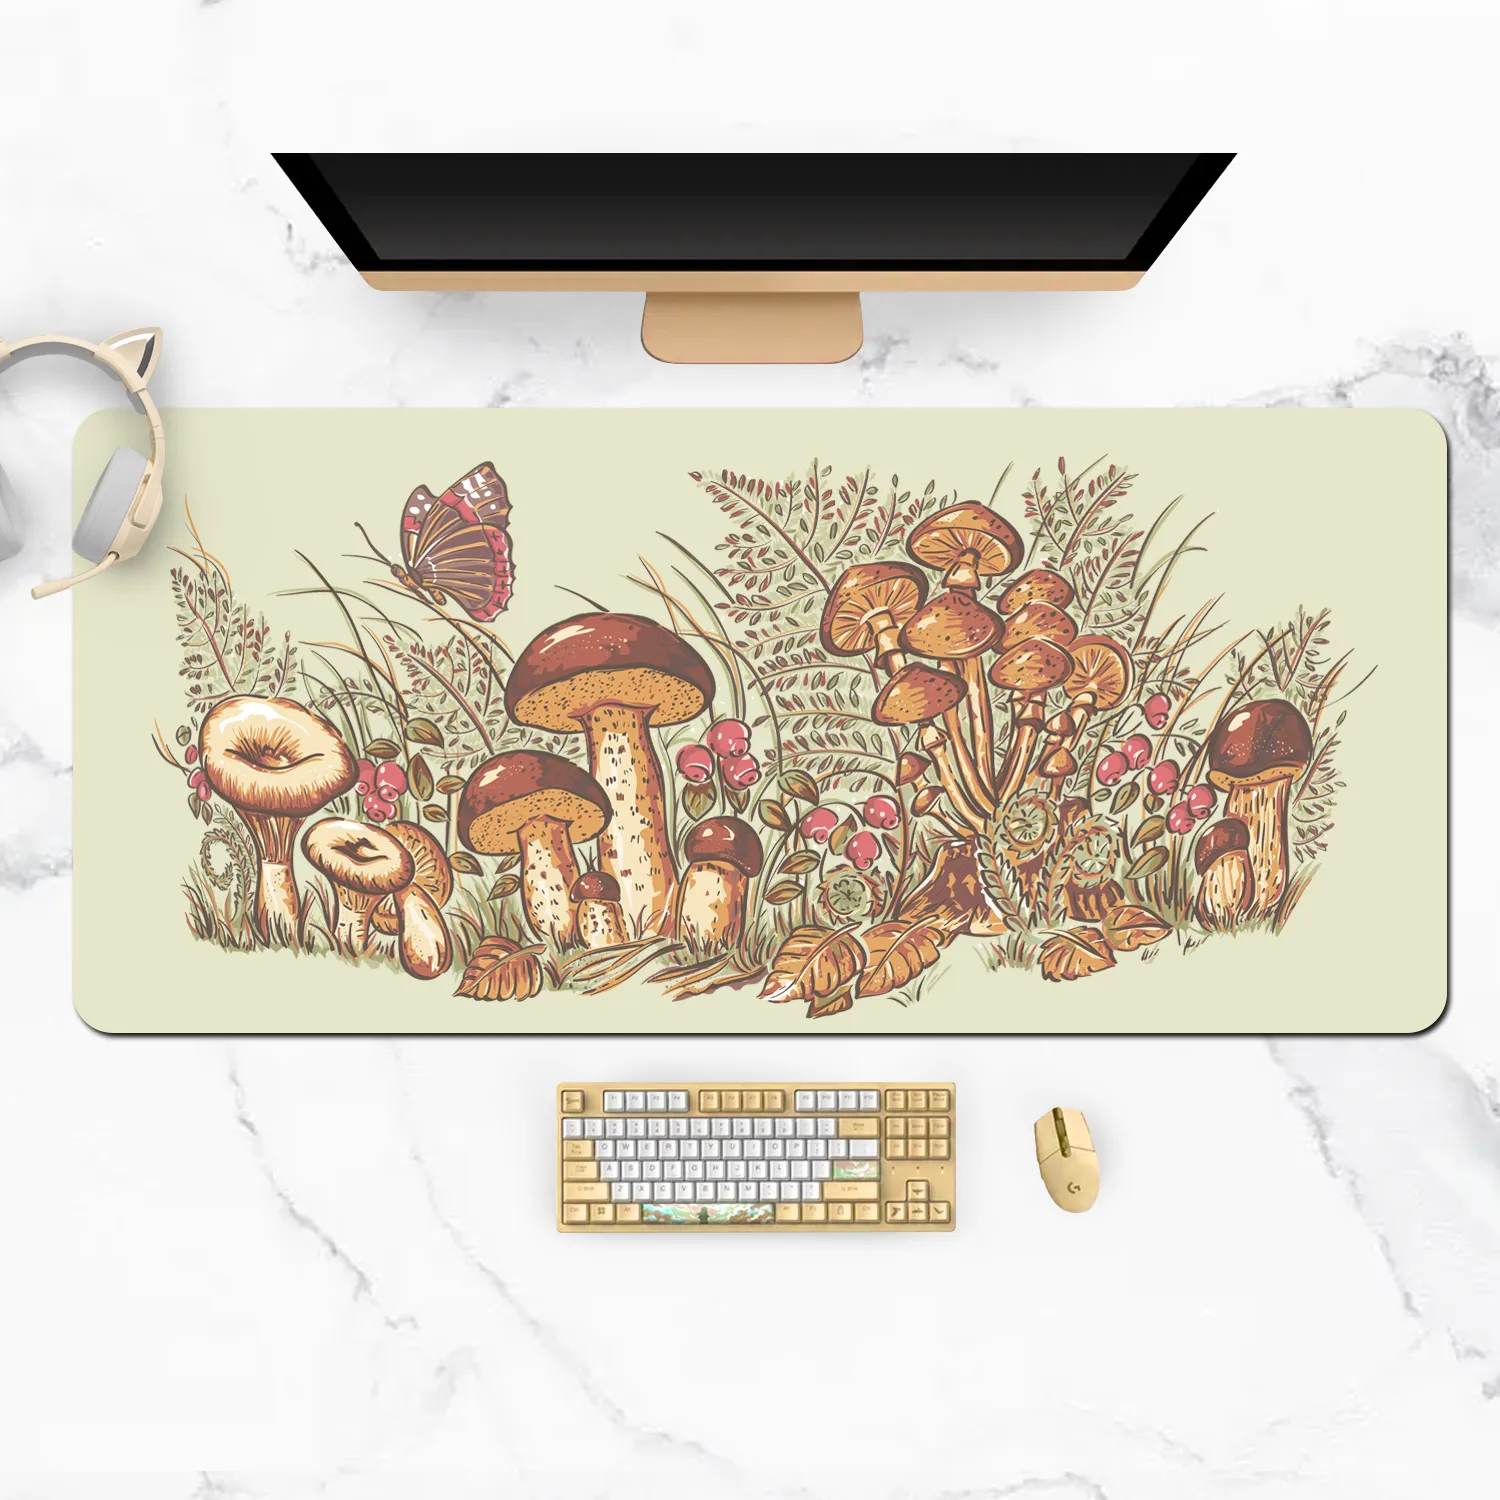 Extra Large Kawaii Gaming Mouse Pad Vintage Cottagecore Mushrooms XXL Desk Mat Water Proof Nonslip Laptop Desk Accessories